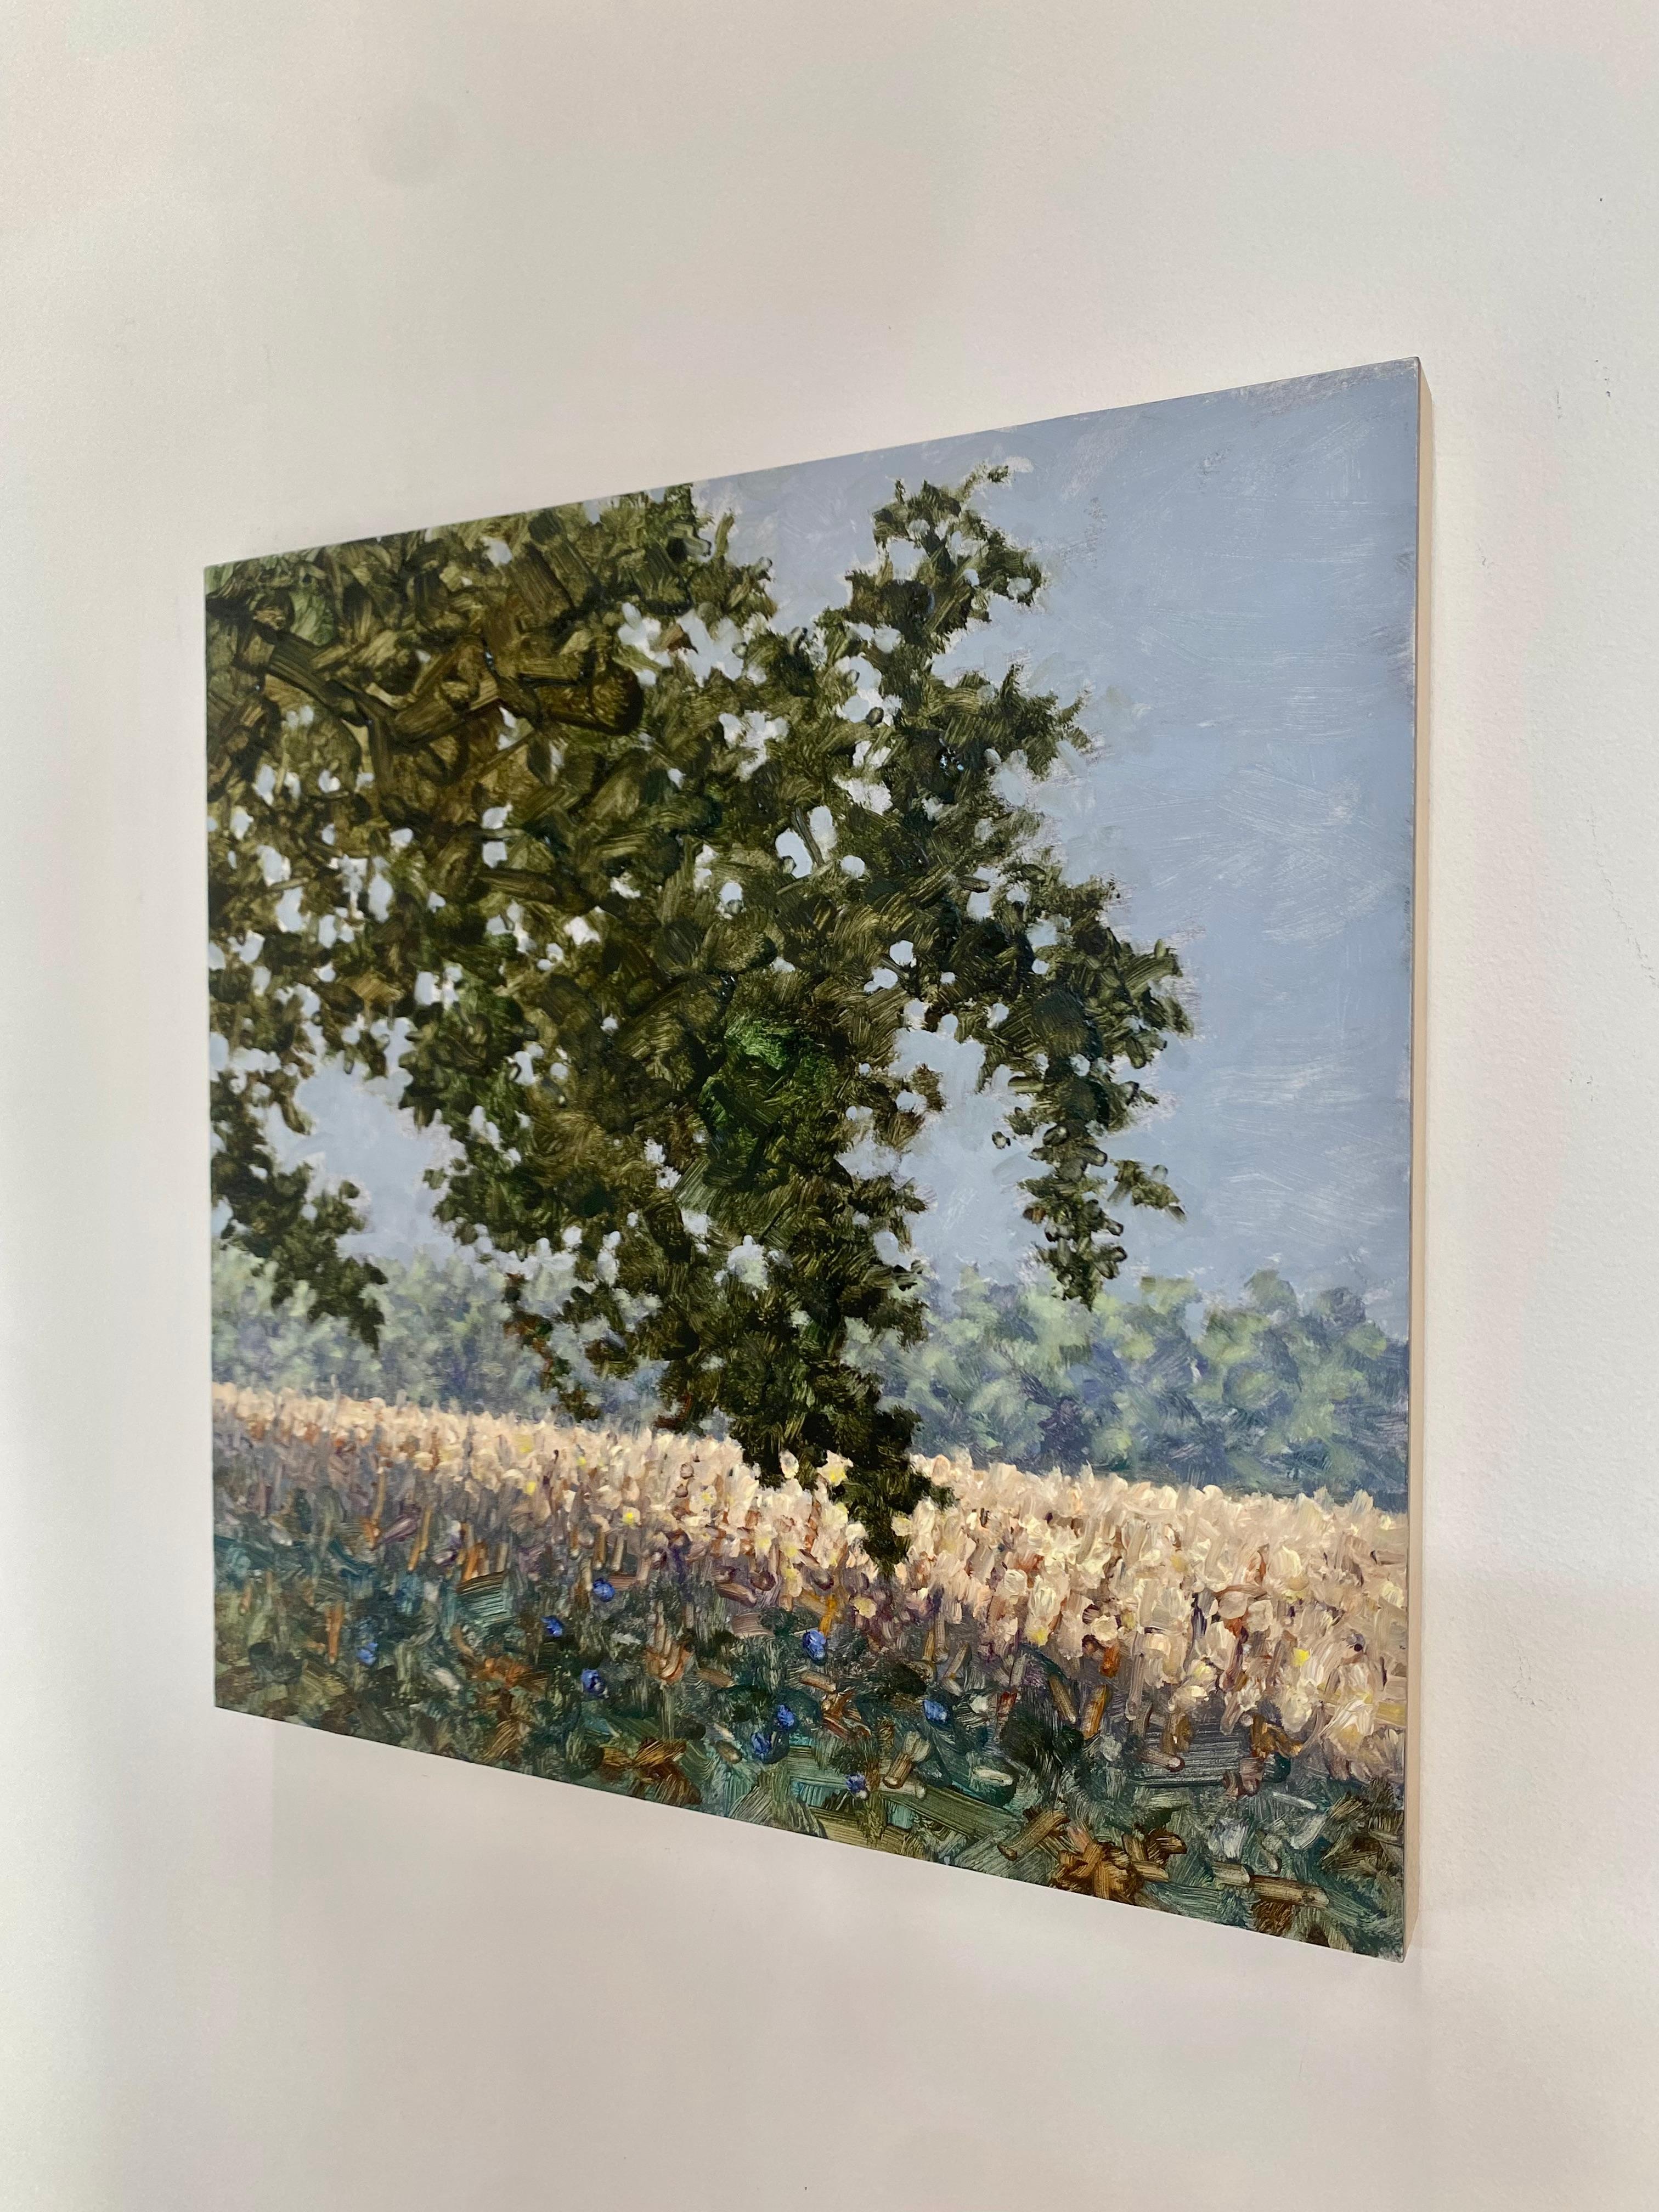 A peaceful outdoor scene of a delicately painted field with lavender and periwinkle blue flowers beneath a tree with dark olive green leaves, beautifully capturing the idyllic feel of a field of wildflowers in mid-September. Signed, dated and titled